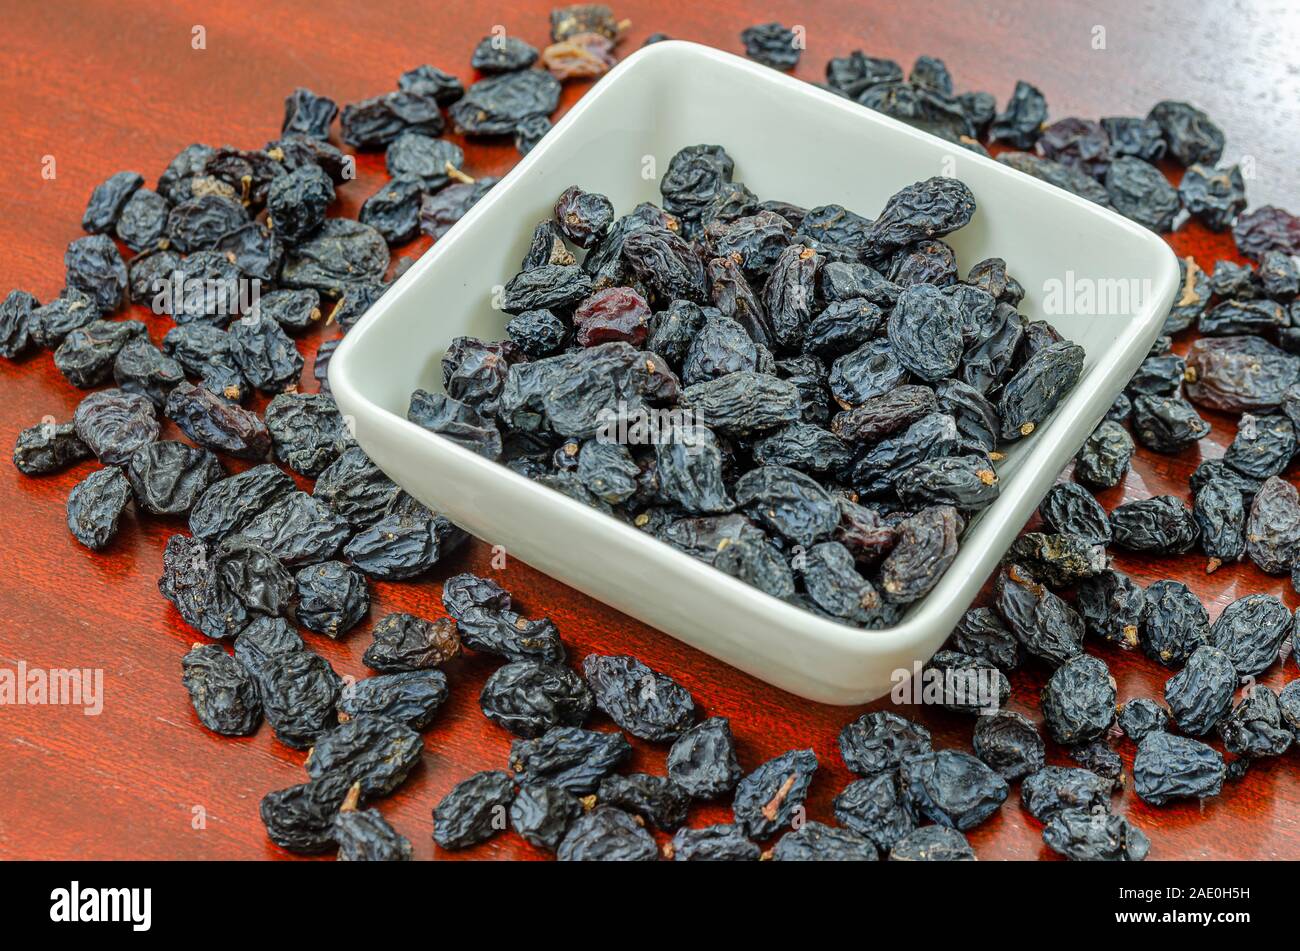 Black raisins in a bowl and on a wooden table. Stock Photo